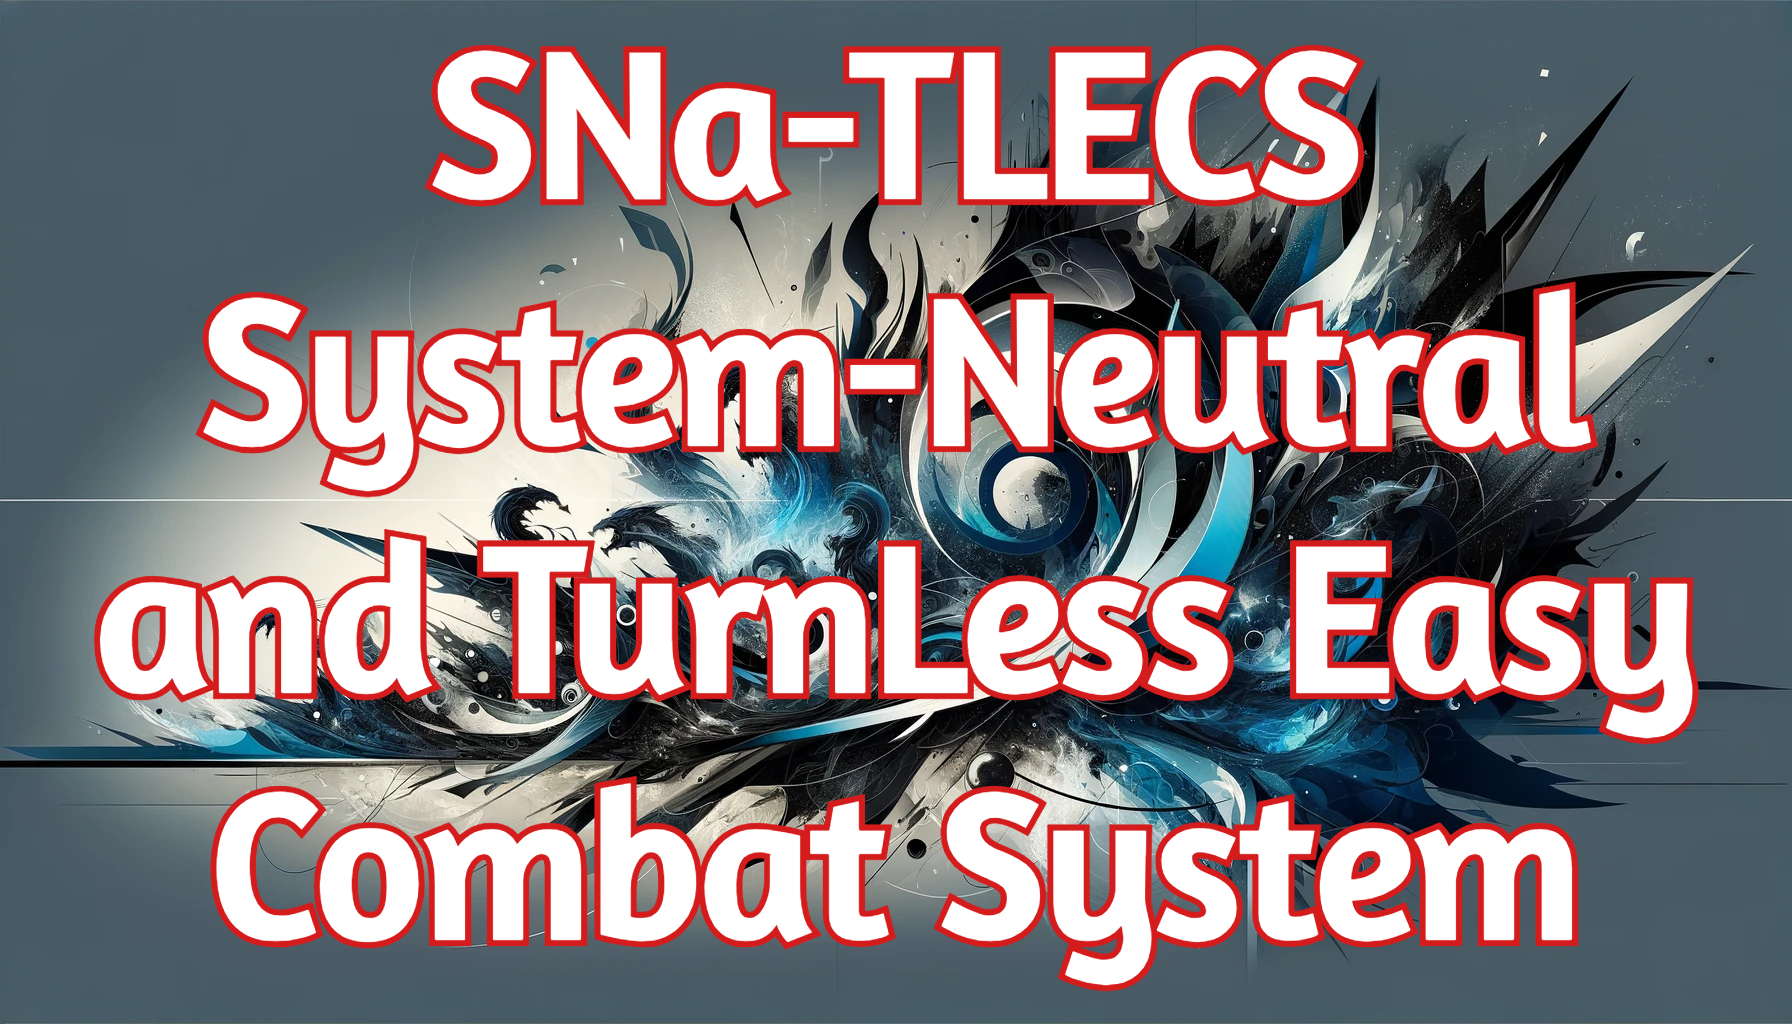 SNa-TLECS: System-Neutral and TurnLess Easy Combat System